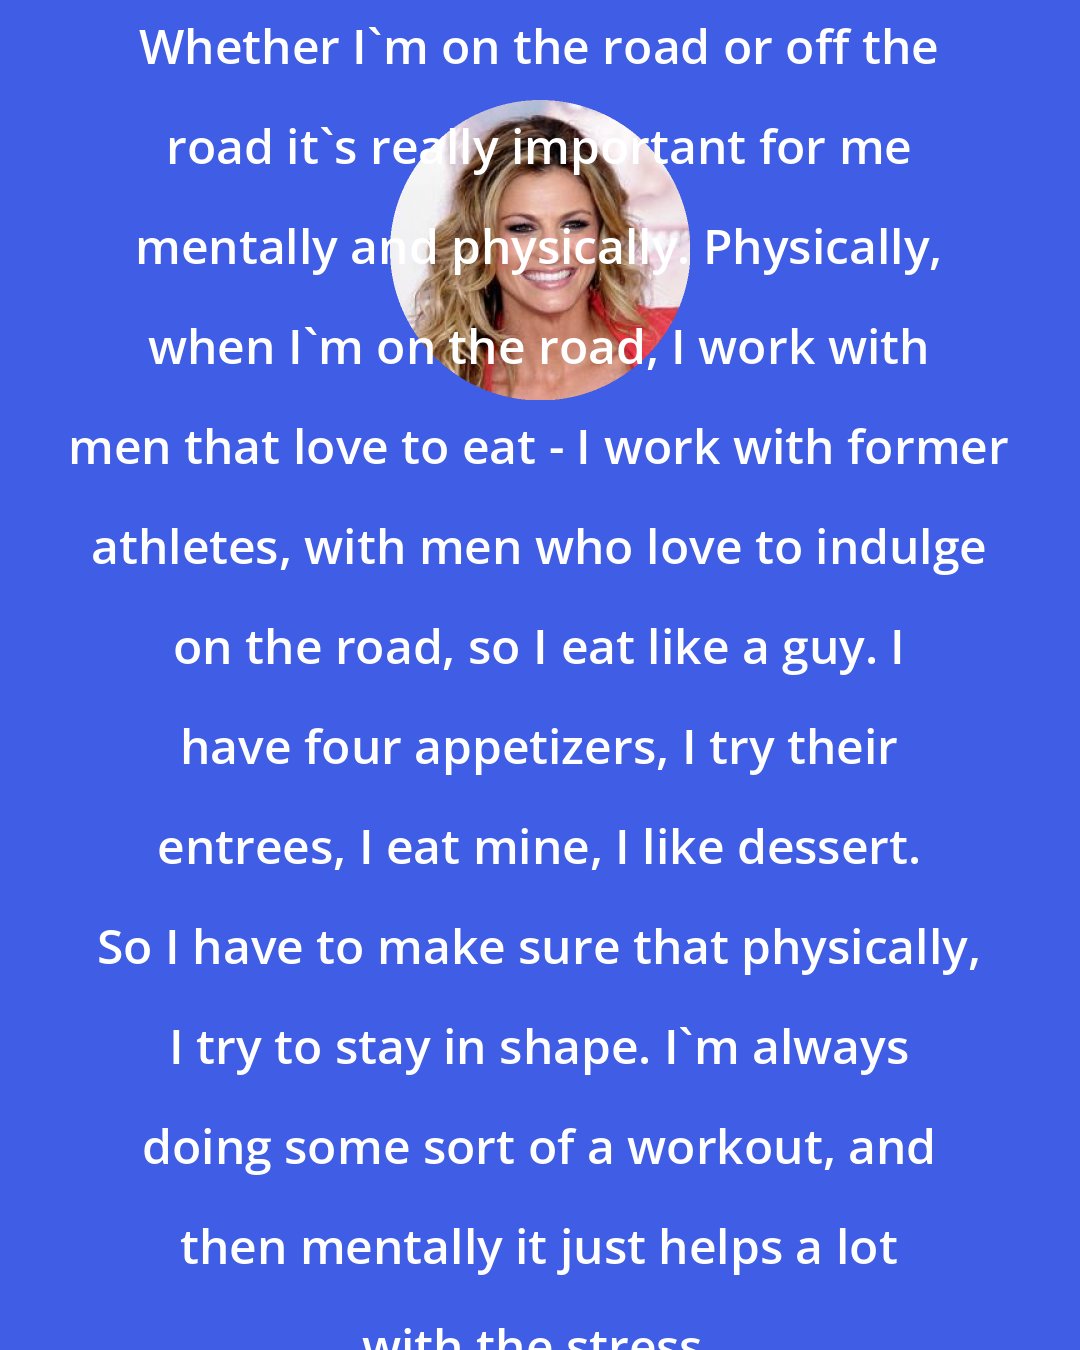 Erin Andrews: Whether I'm on the road or off the road it's really important for me mentally and physically. Physically, when I'm on the road, I work with men that love to eat - I work with former athletes, with men who love to indulge on the road, so I eat like a guy. I have four appetizers, I try their entrees, I eat mine, I like dessert. So I have to make sure that physically, I try to stay in shape. I'm always doing some sort of a workout, and then mentally it just helps a lot with the stress.